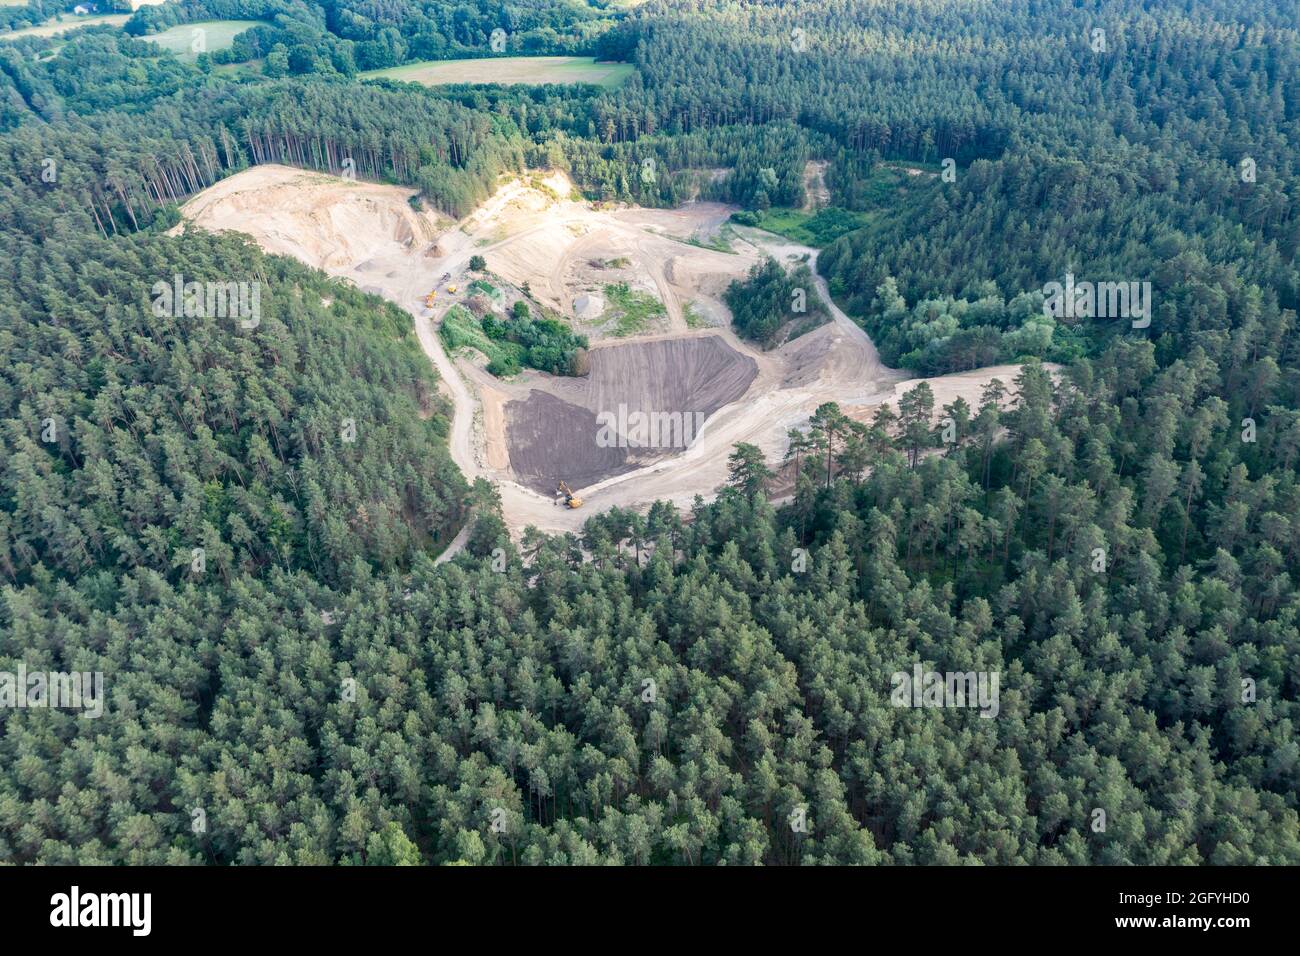 Aerial view of a fgavel pit near Elbe river west of Hitzacker, Germany Stock Photo